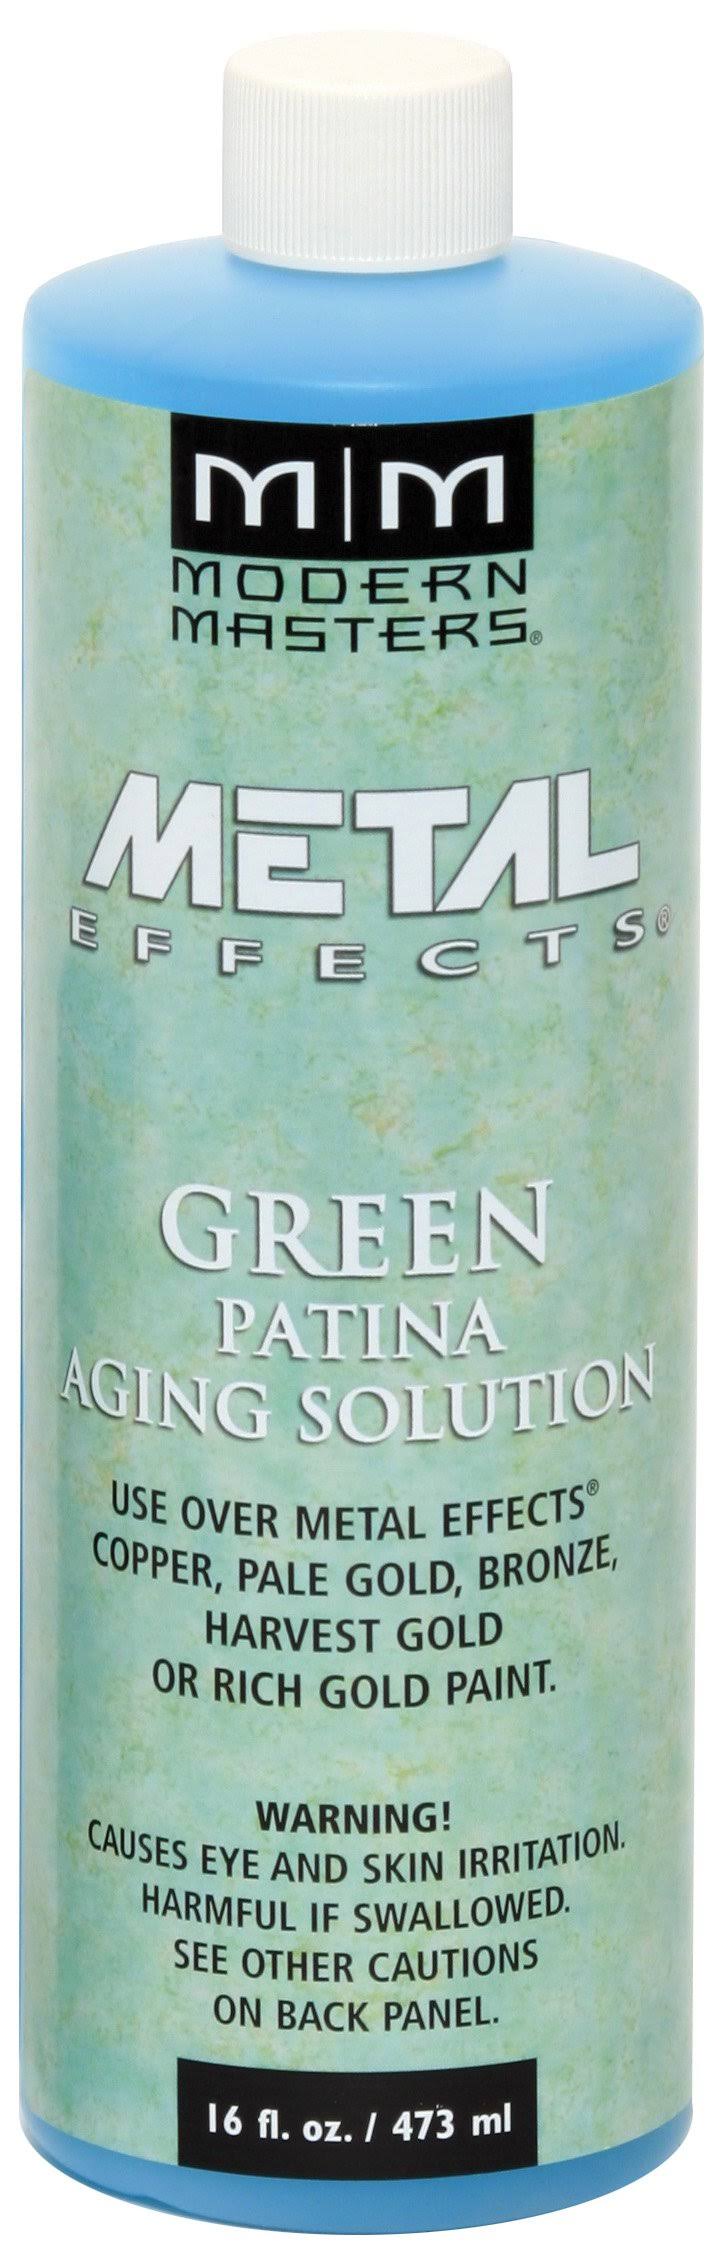 Modern Masters Metal Effects Aging Solution - Green Patina, 473ml